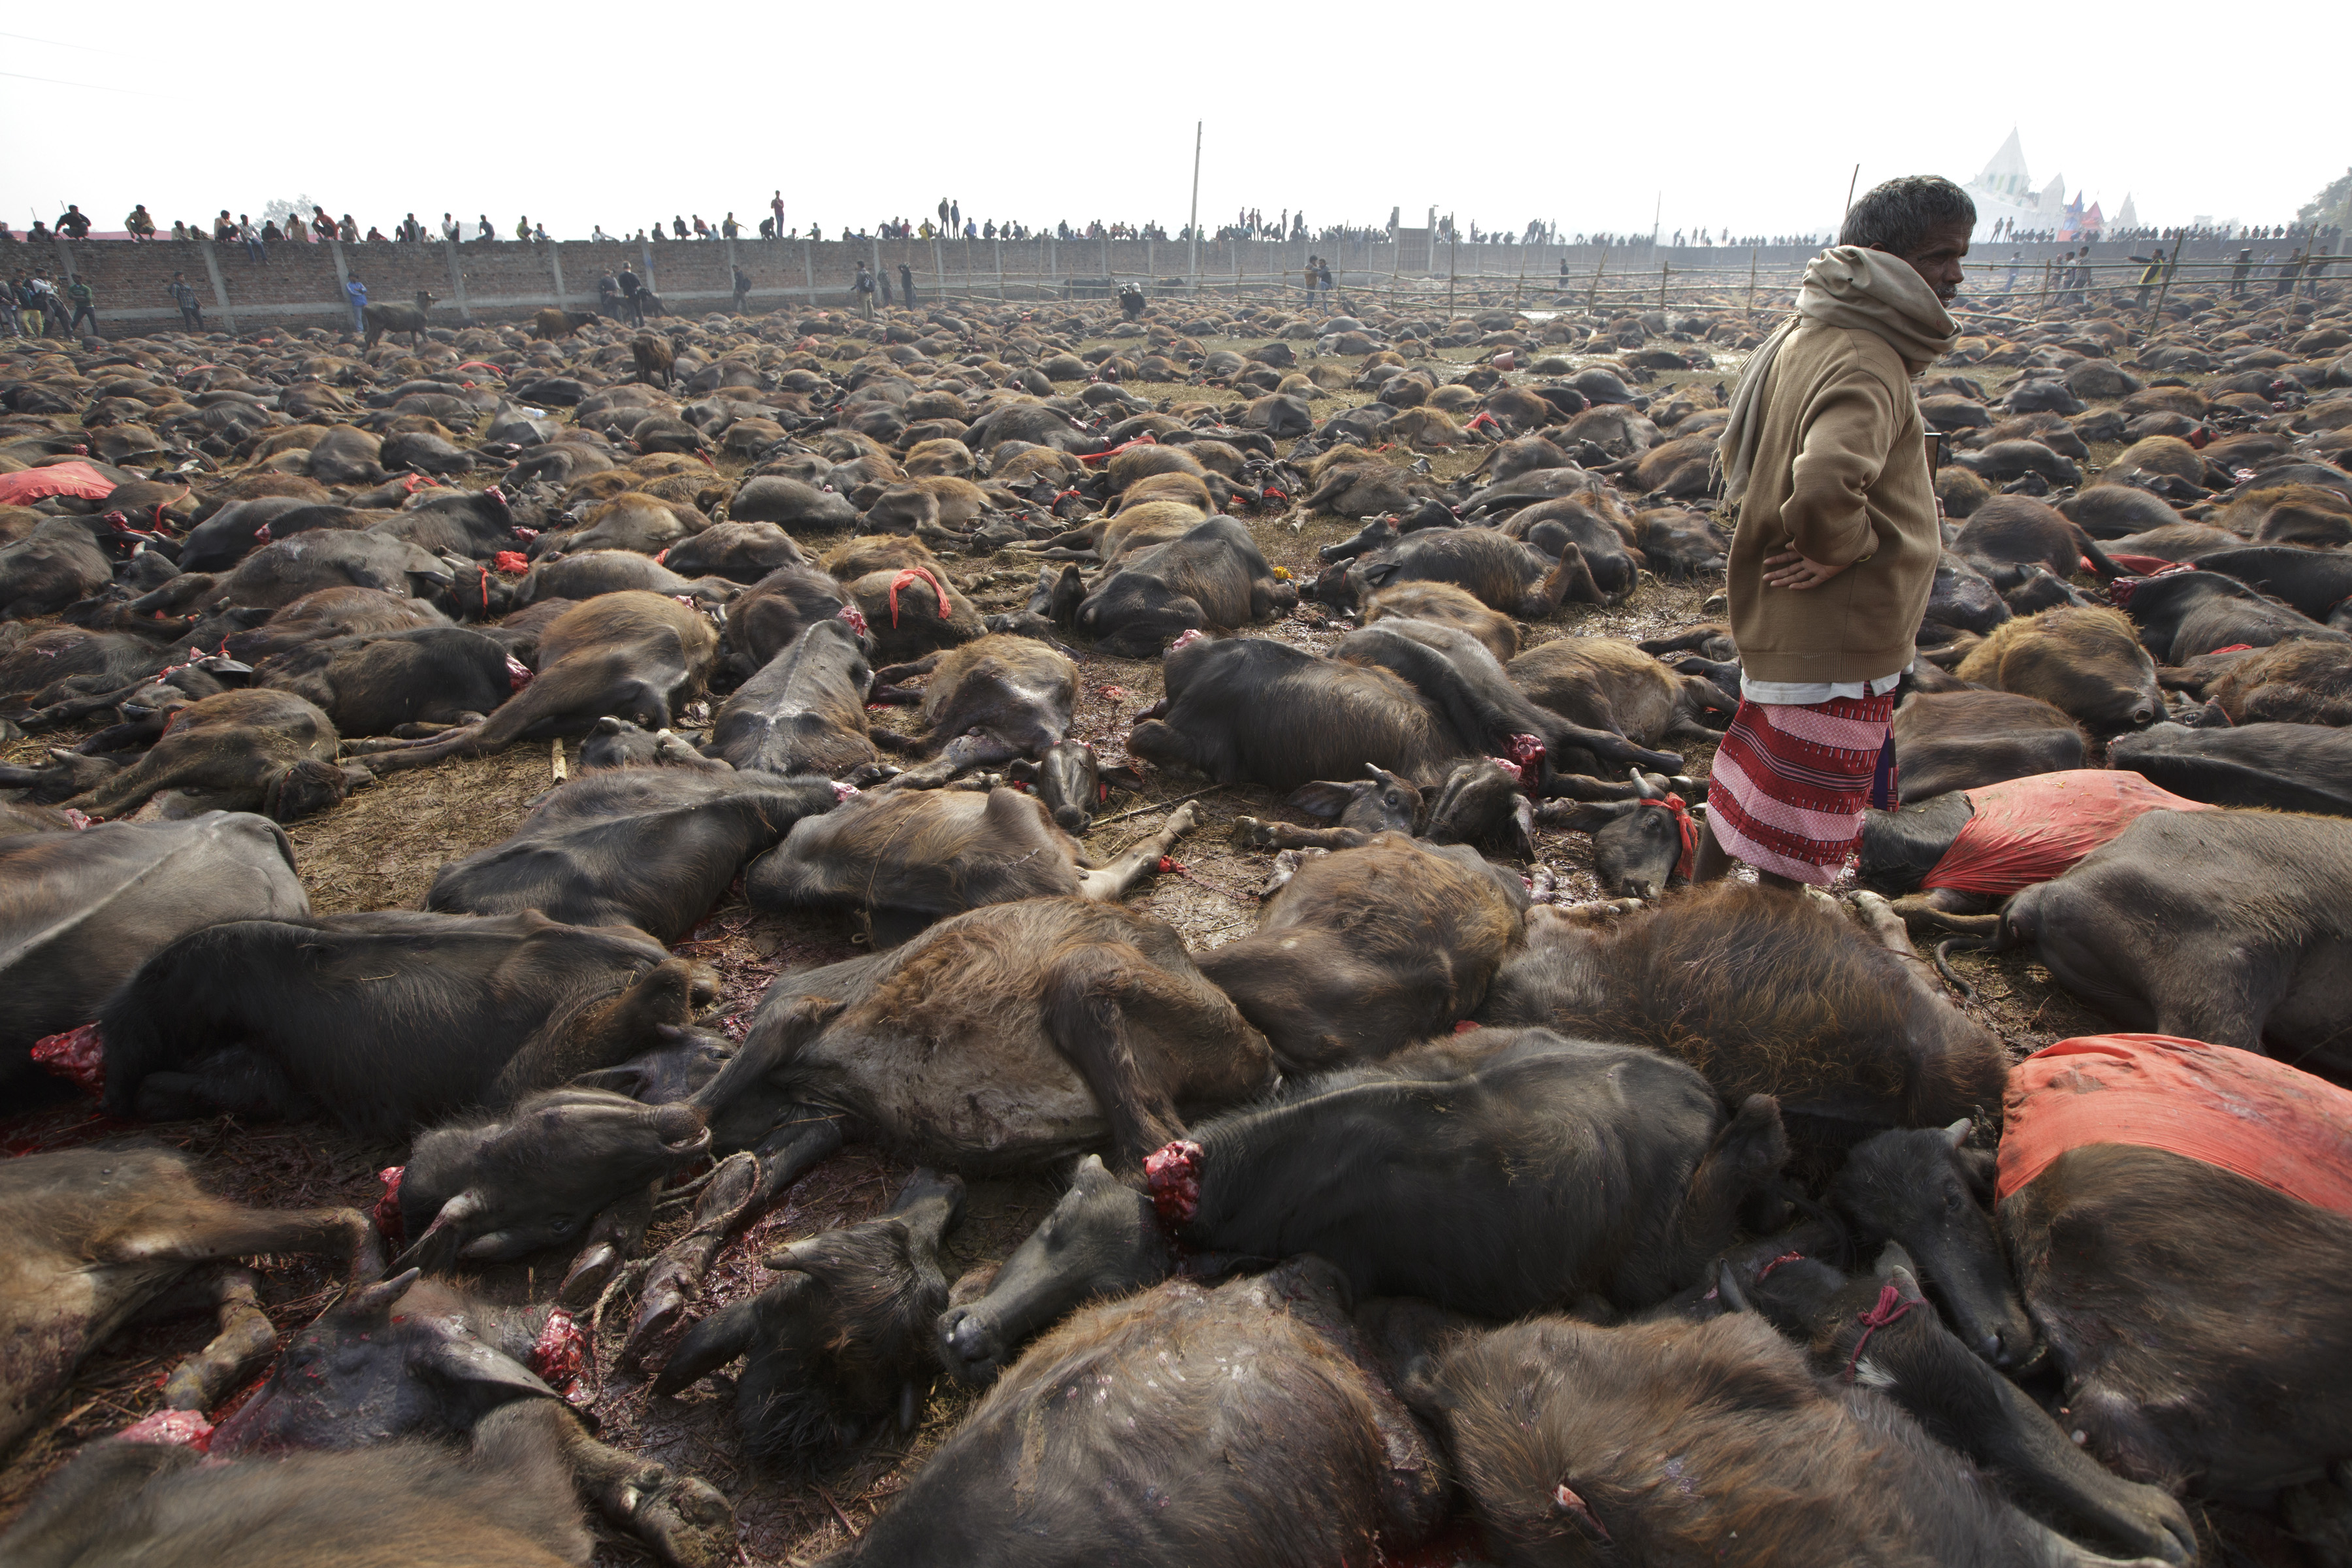 The Field of Battle for Animals is Global - HSI Top Achievements for 2015 ·  A Humane World